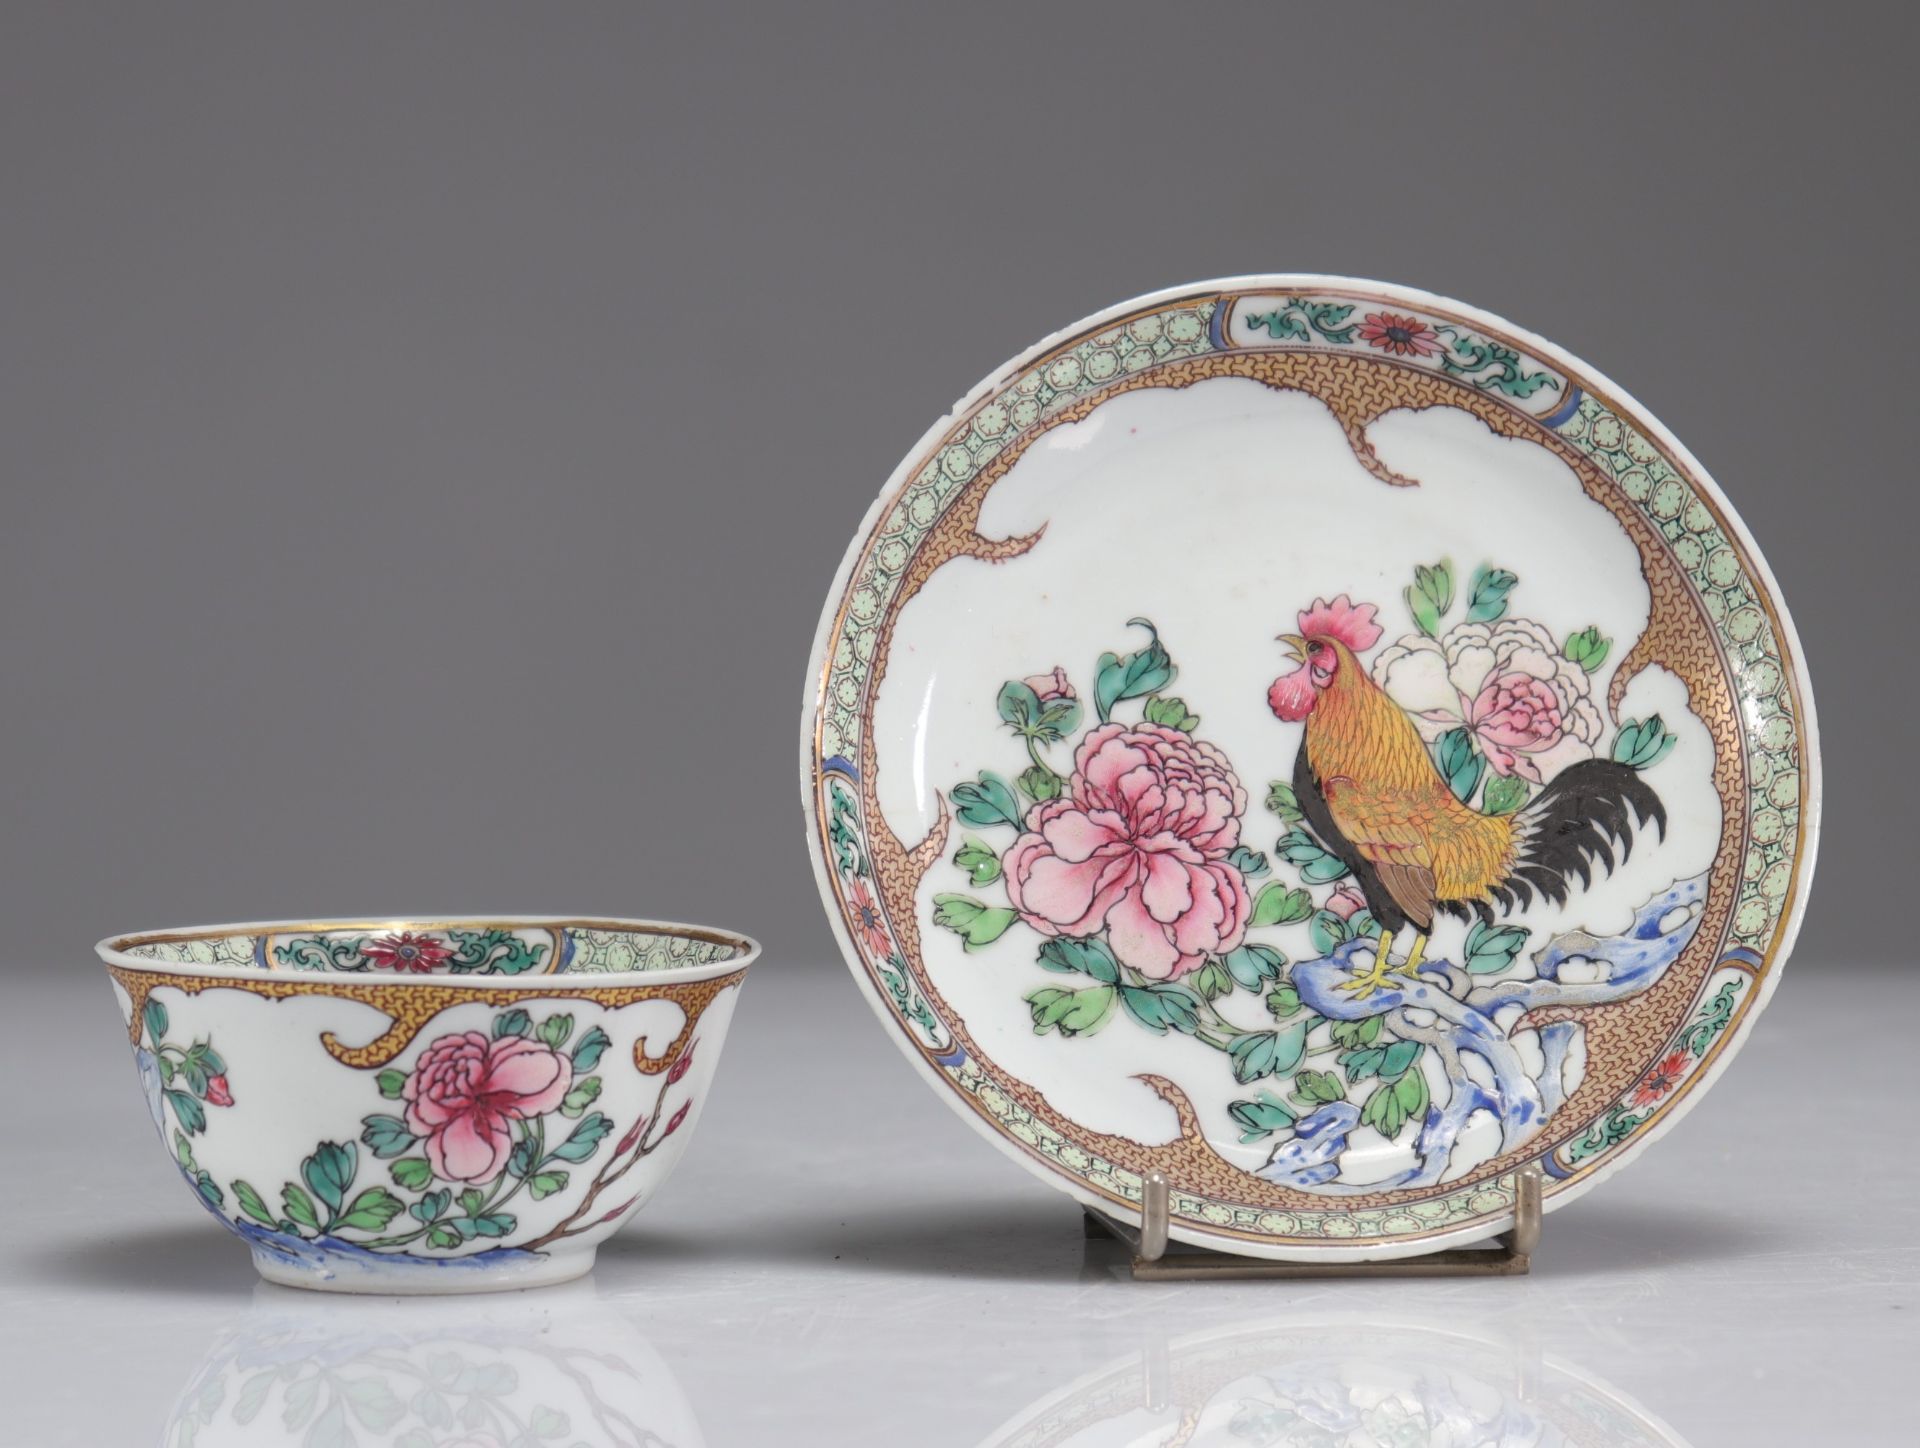 18th century famille rose porcelain bowls and plates (3) - Image 3 of 7